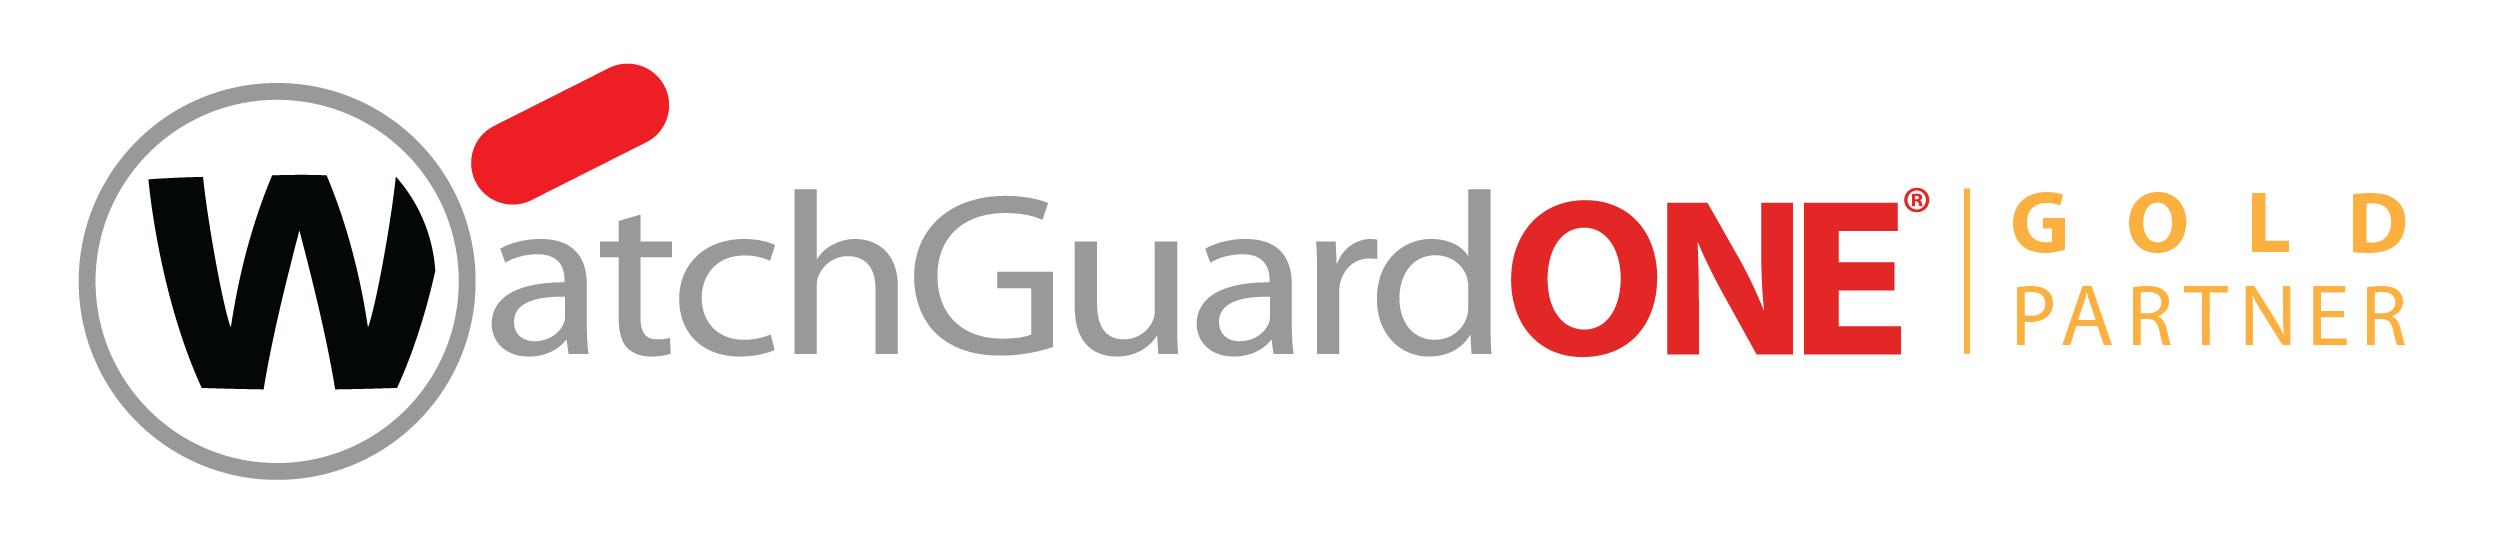 Watch Guard one Gold